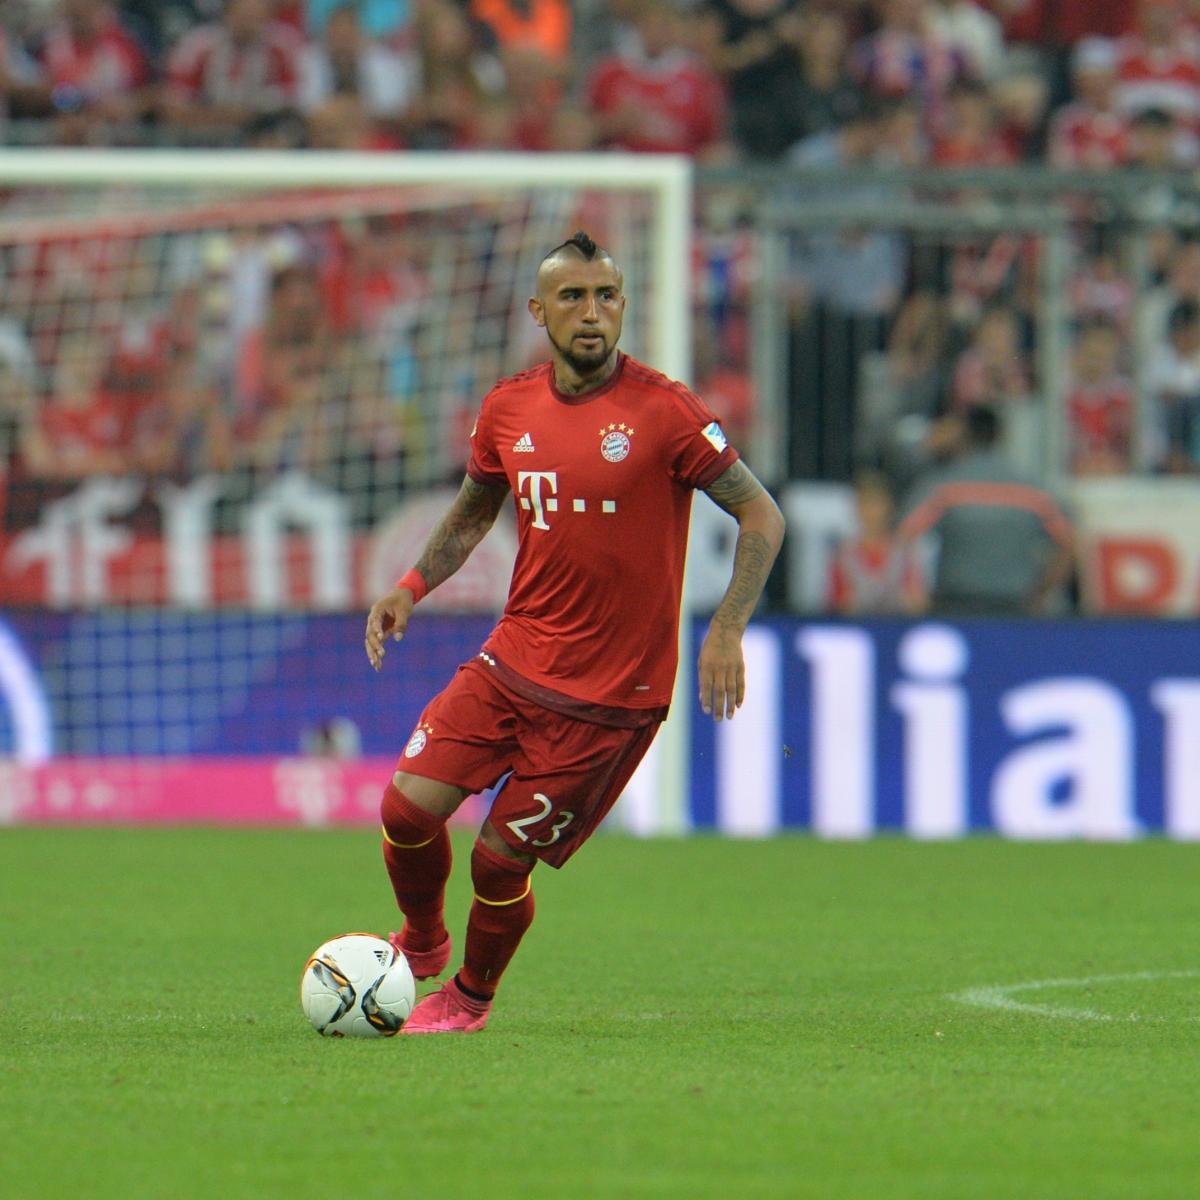 How Bayern Munich's Arturo Vidal Is on Track to Be the Transfer of the Season